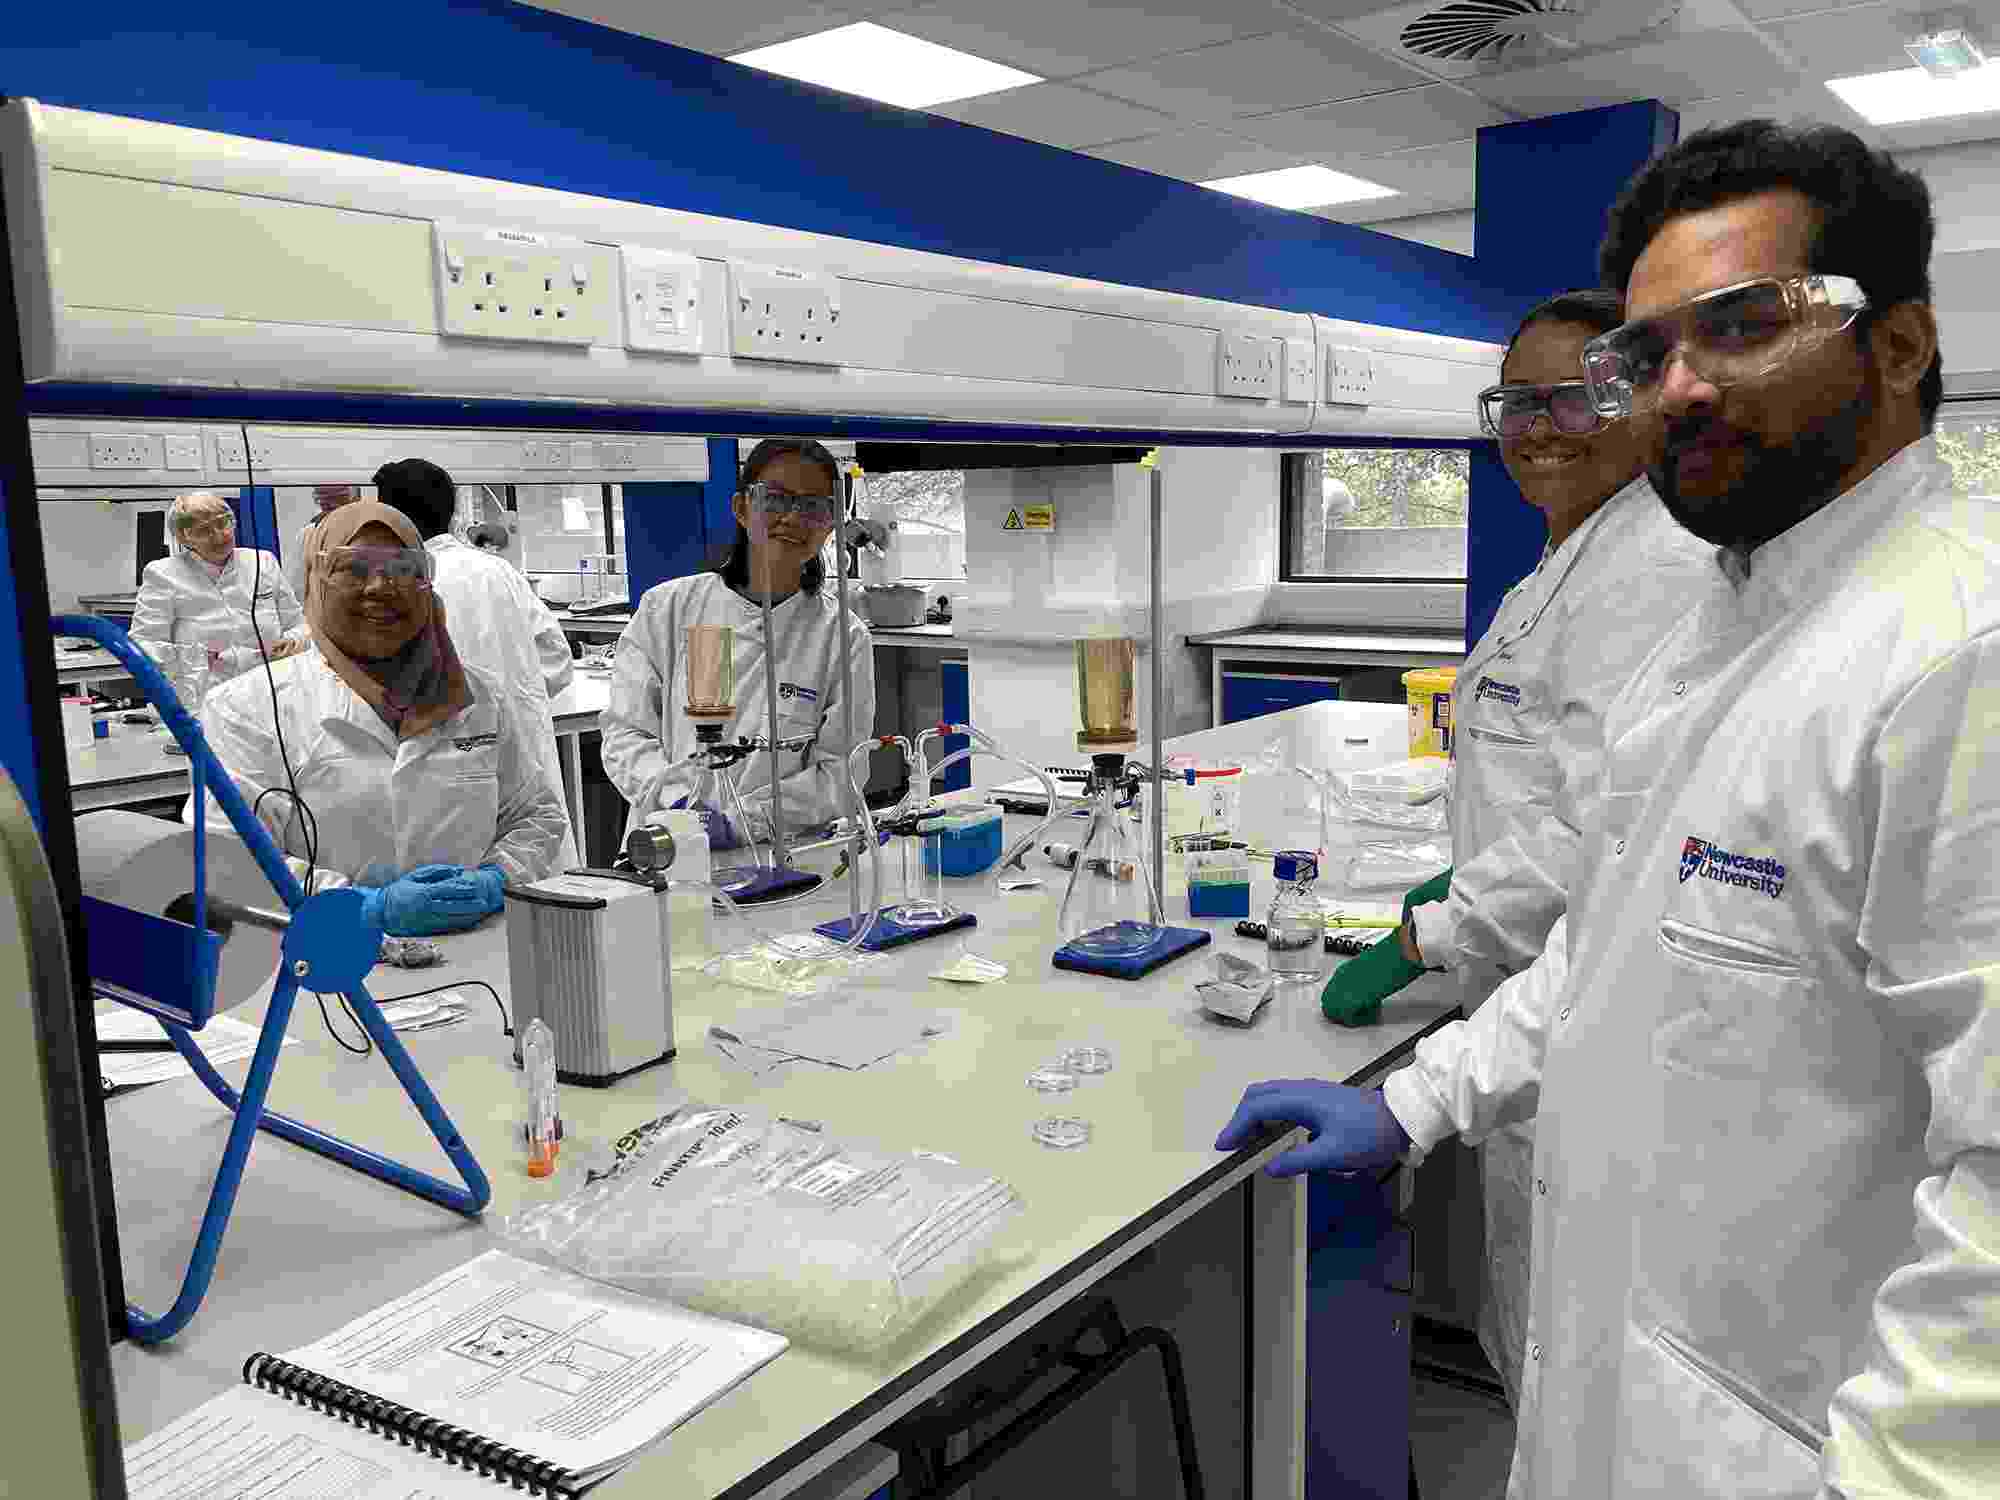 Several people wearing lab coats and safety equipment stand around a work bench in a laboratory, with water sampling equipment spread out on the bench